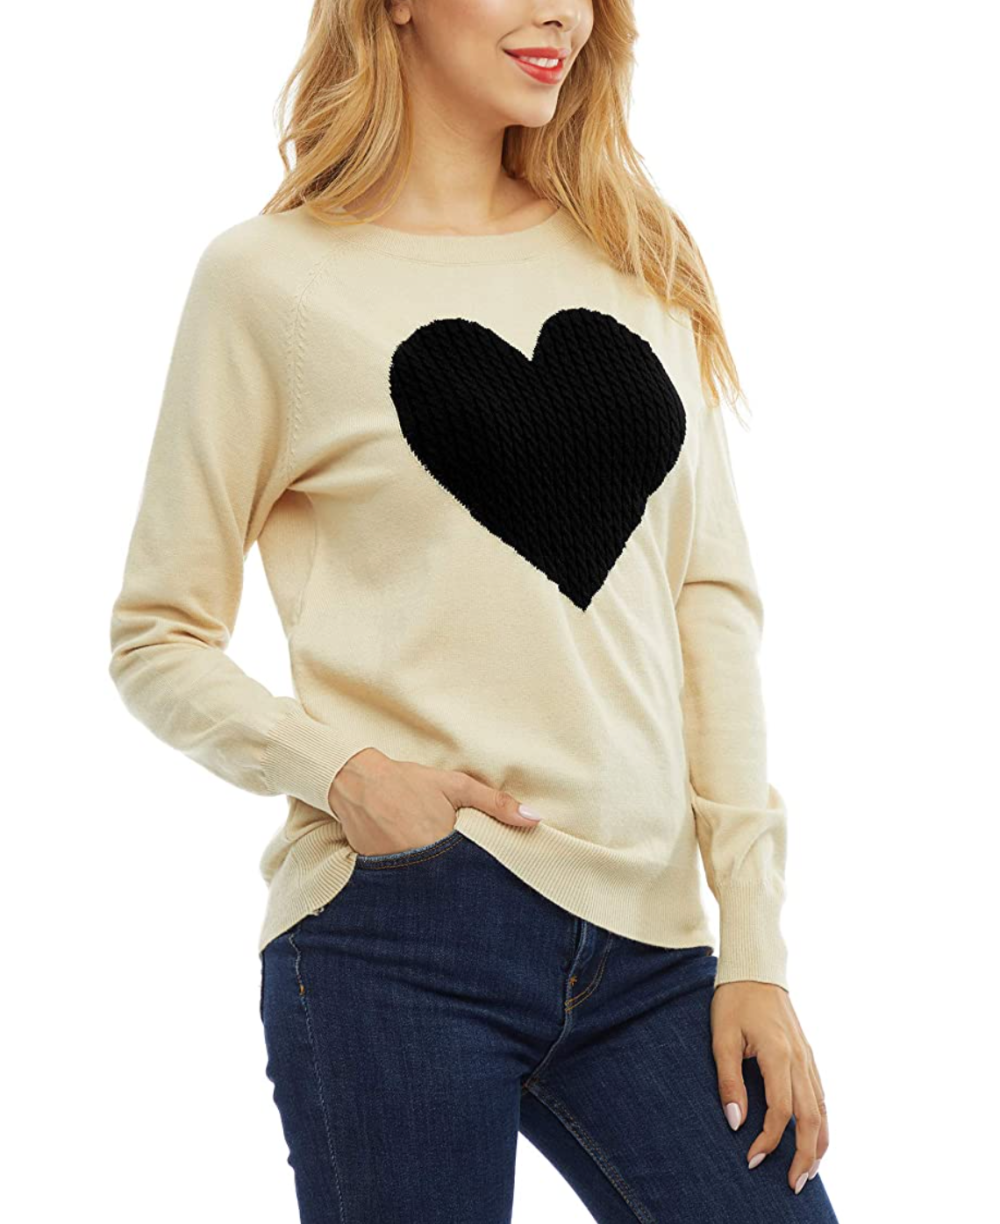 SATINIOR Womens Love Heart Graphic Casual Crew Neck Long Sleeve Knitted Patchwork Pullover Sweater